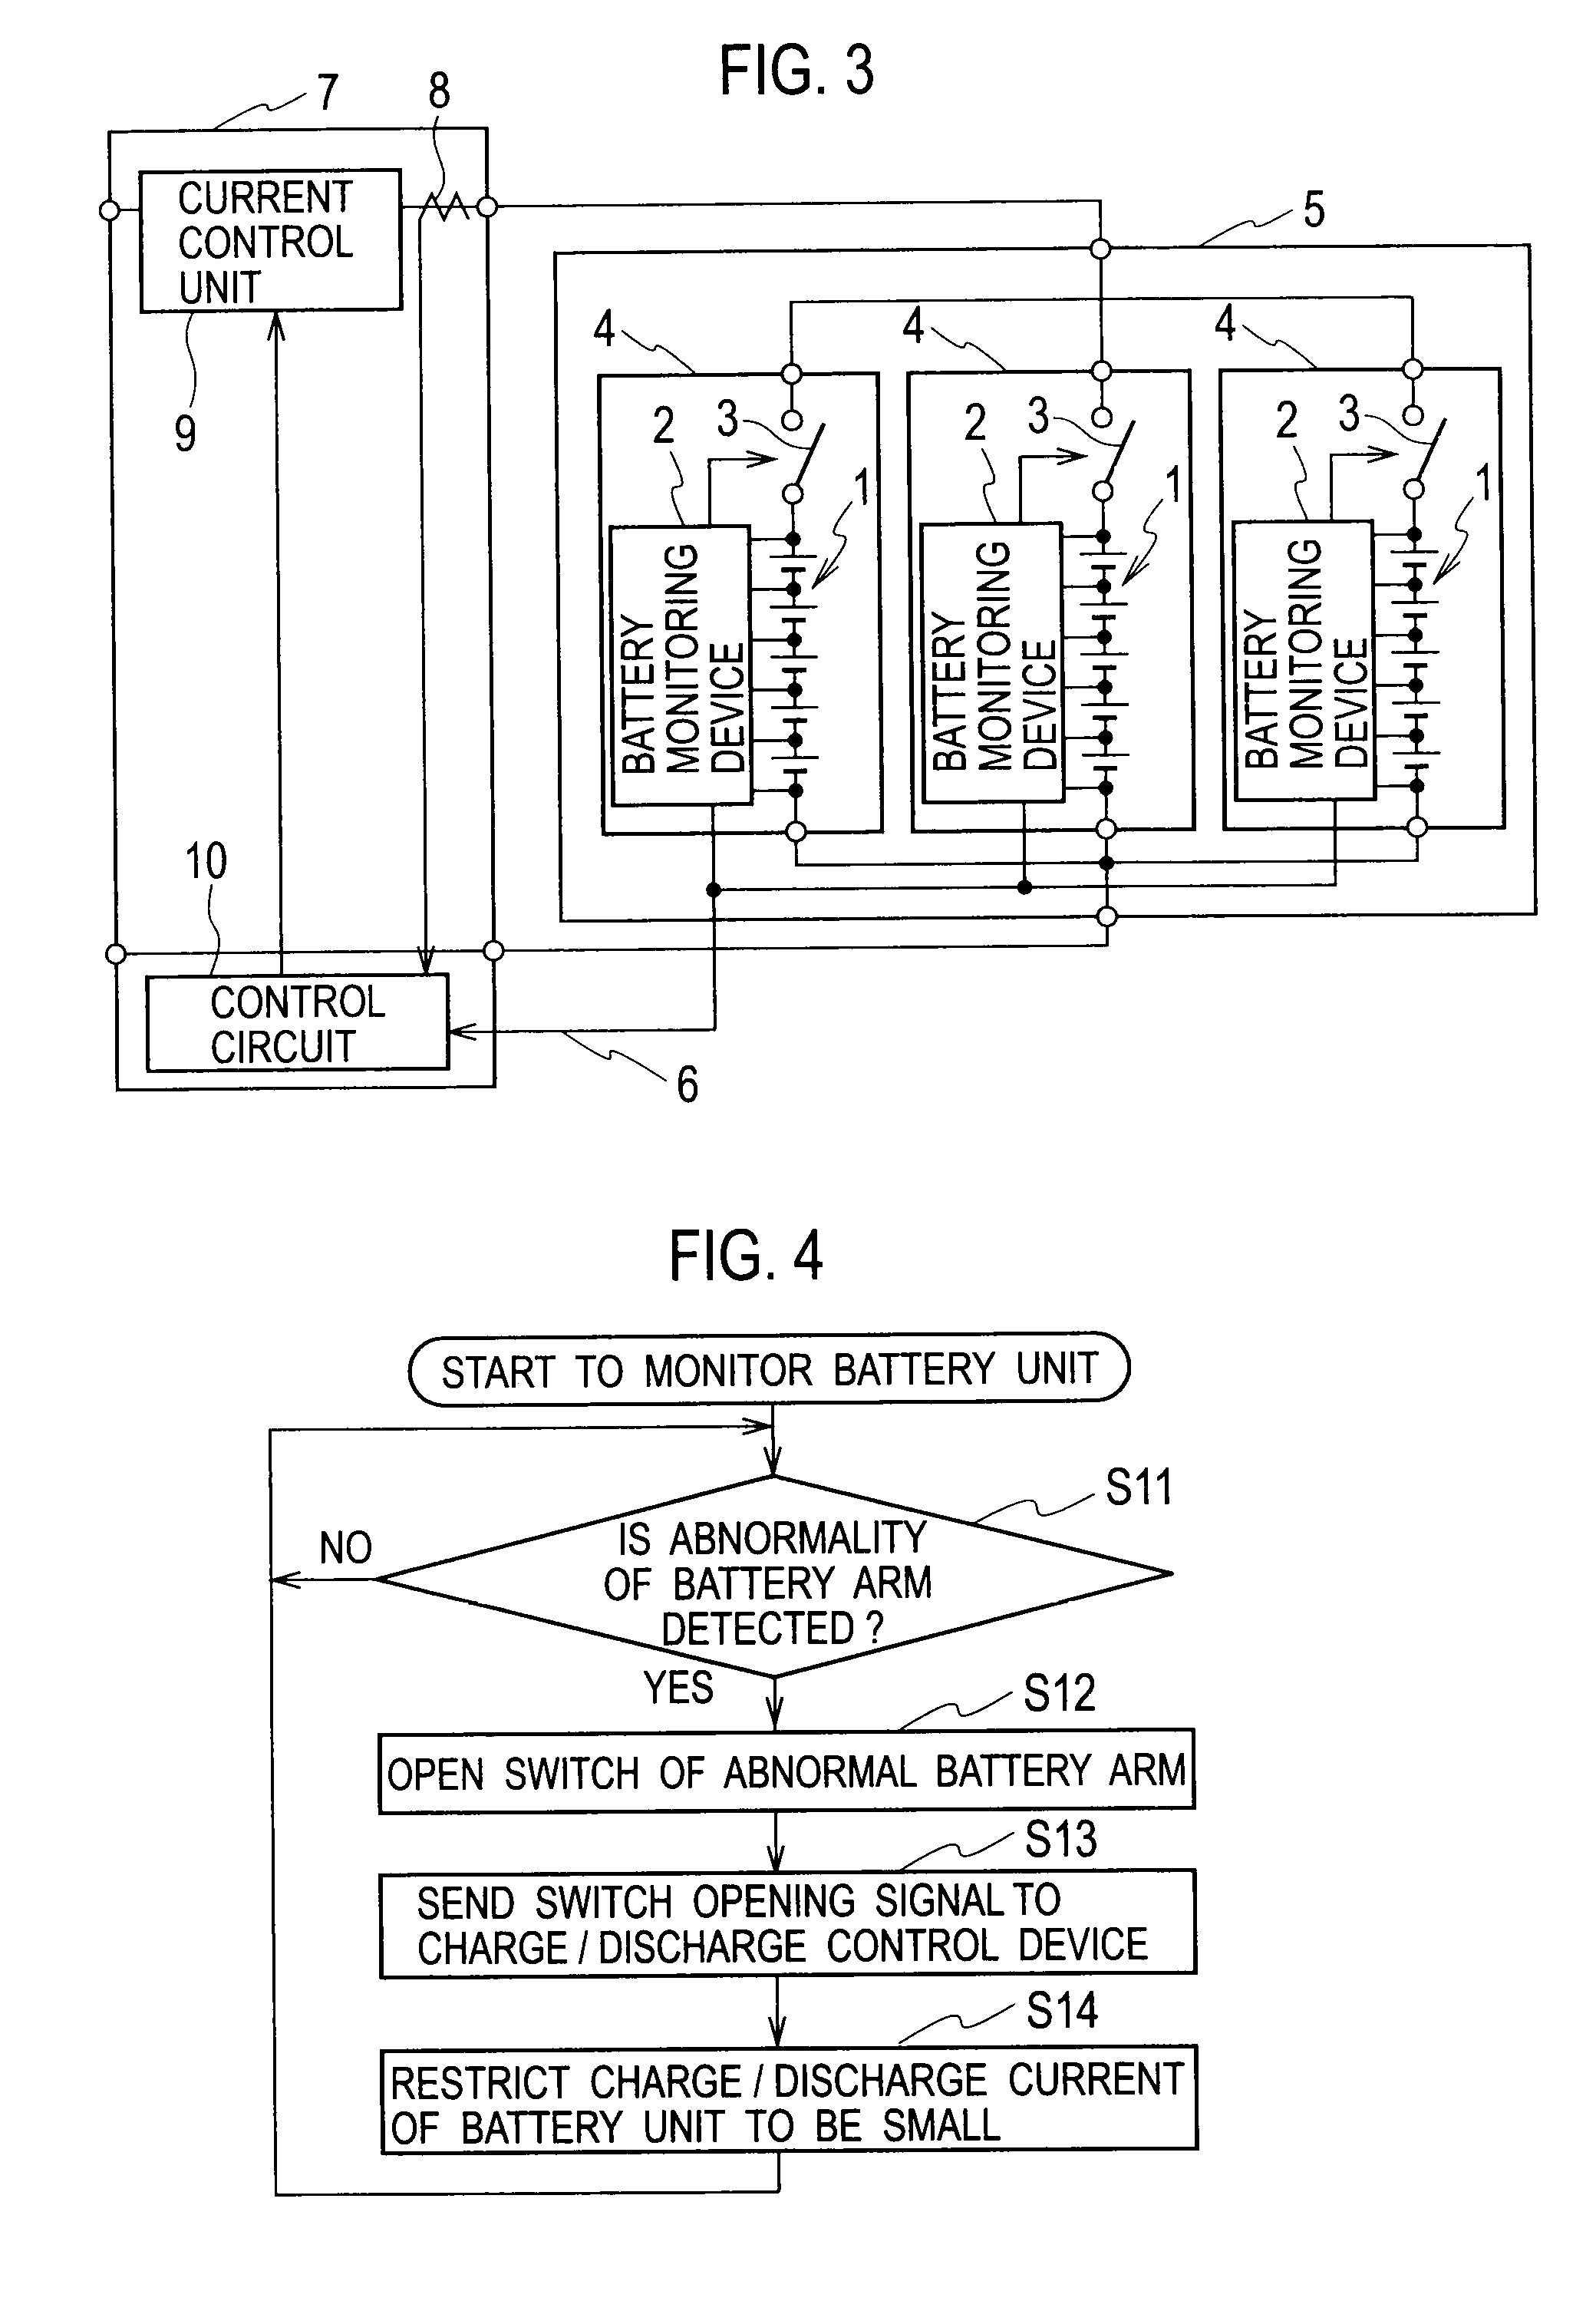 Battery unit and battery system using the battery unit